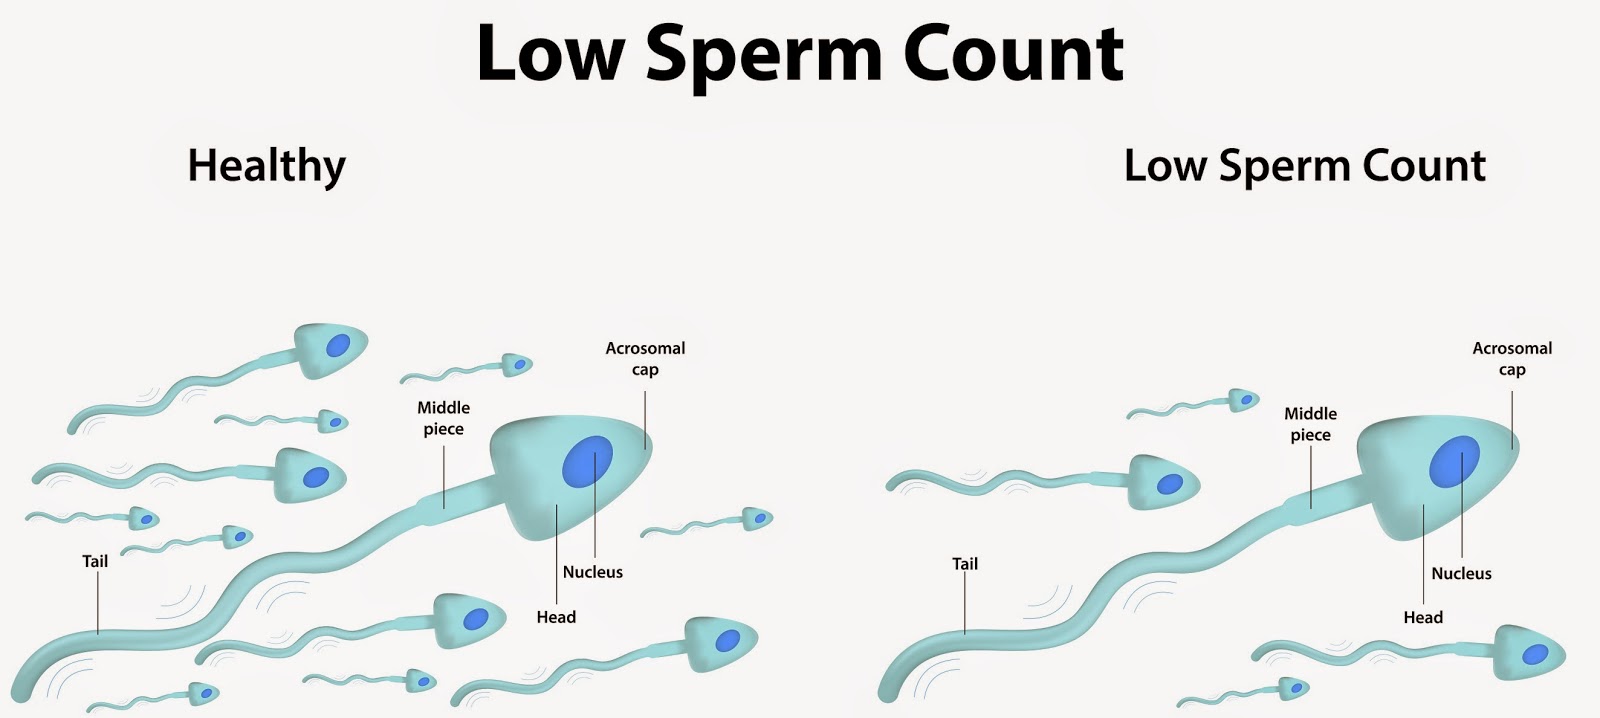 Sperm count of the daily ejaculator